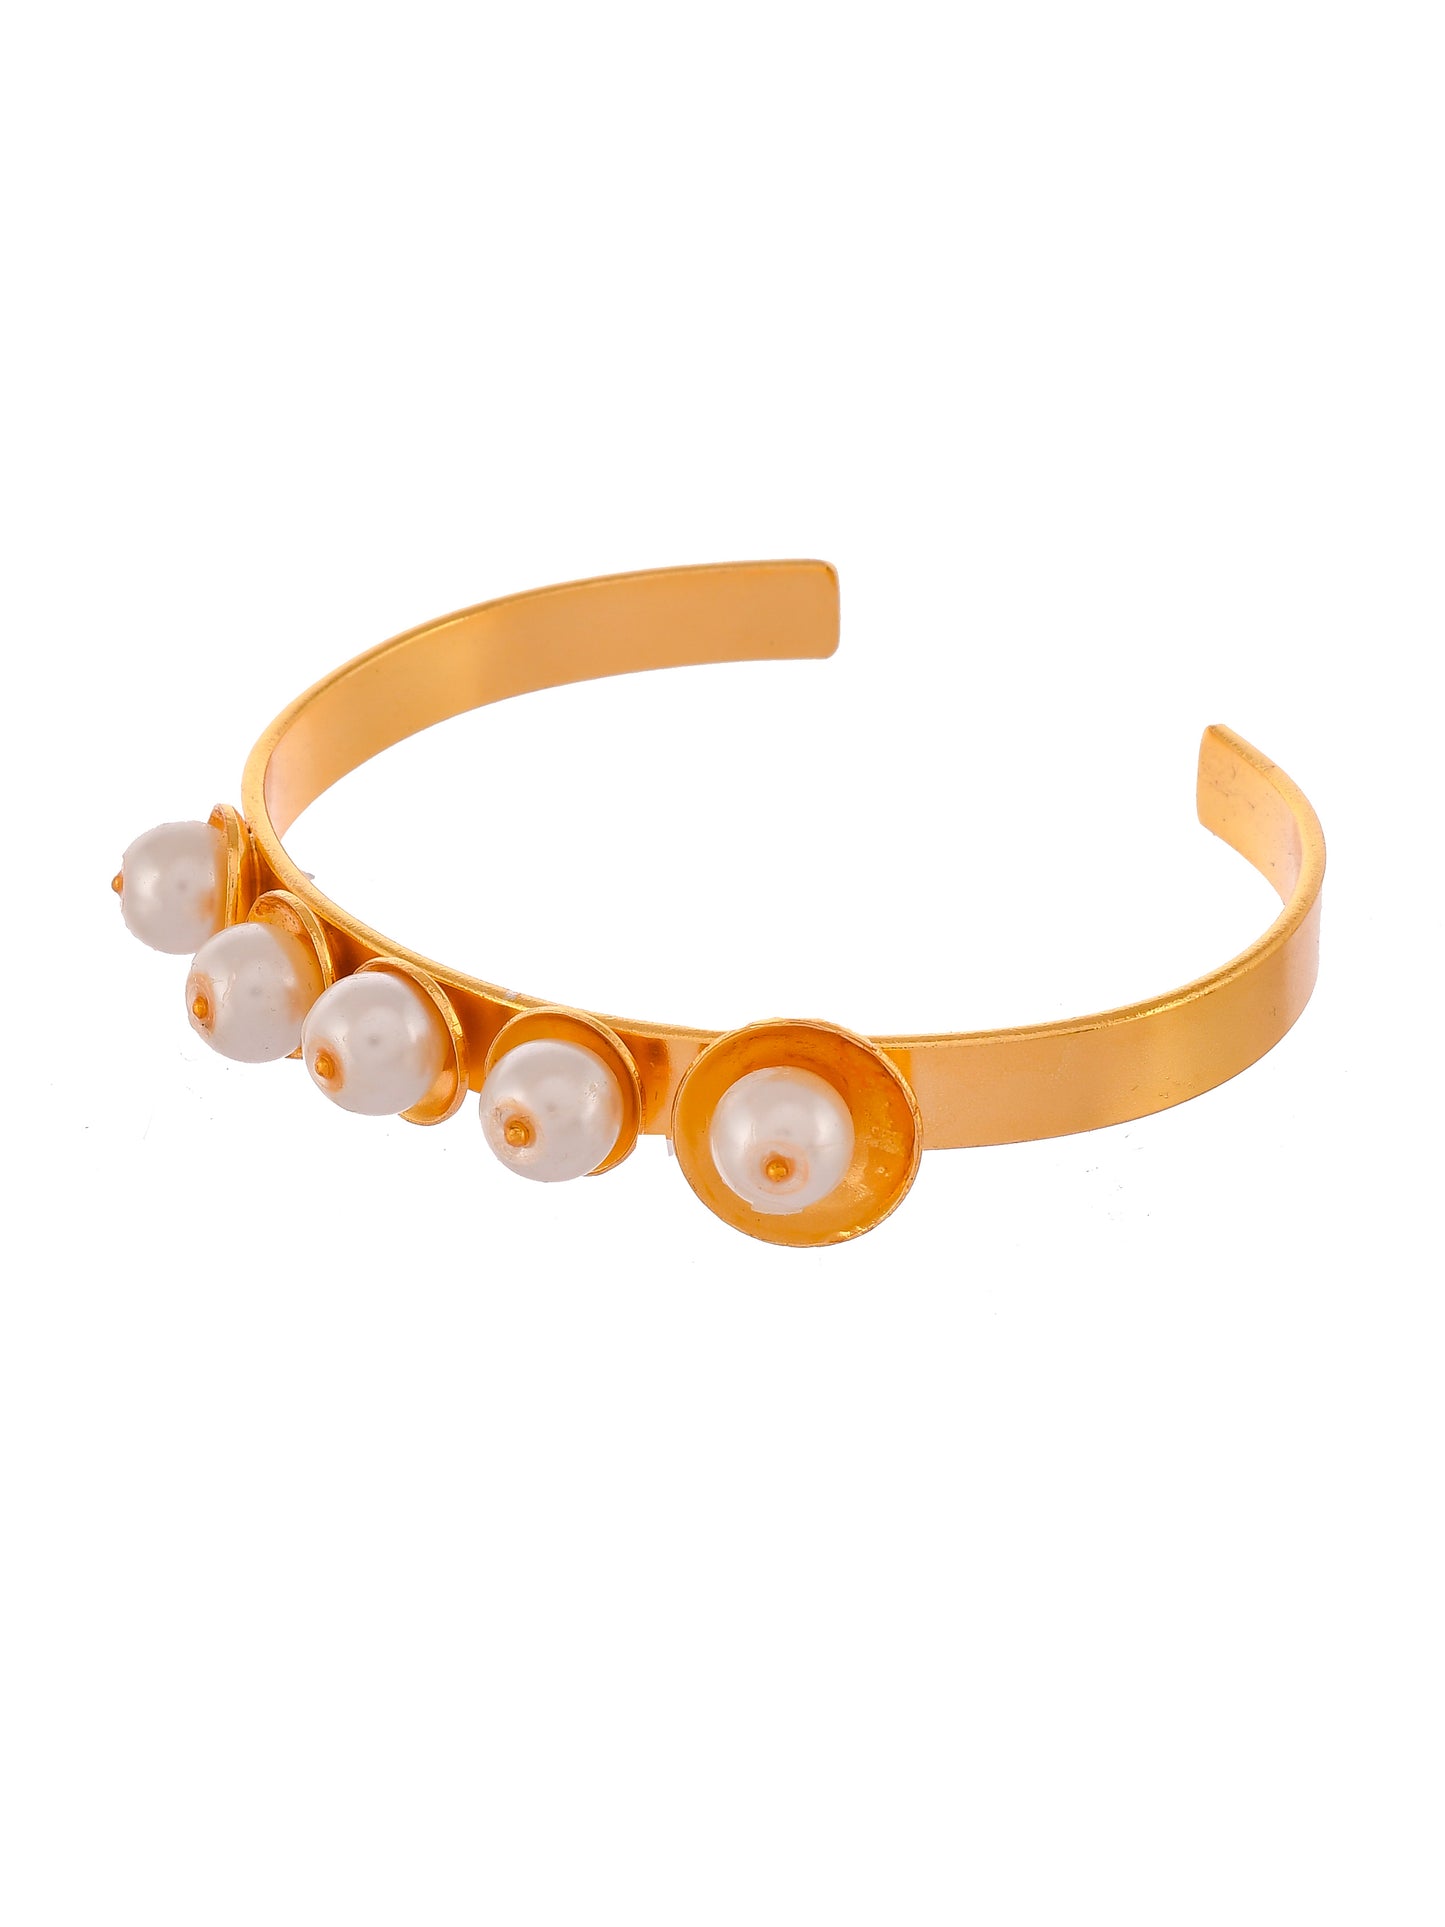 Gold & white Pearl beaded Handcrafted Cuff gold plated bracelet